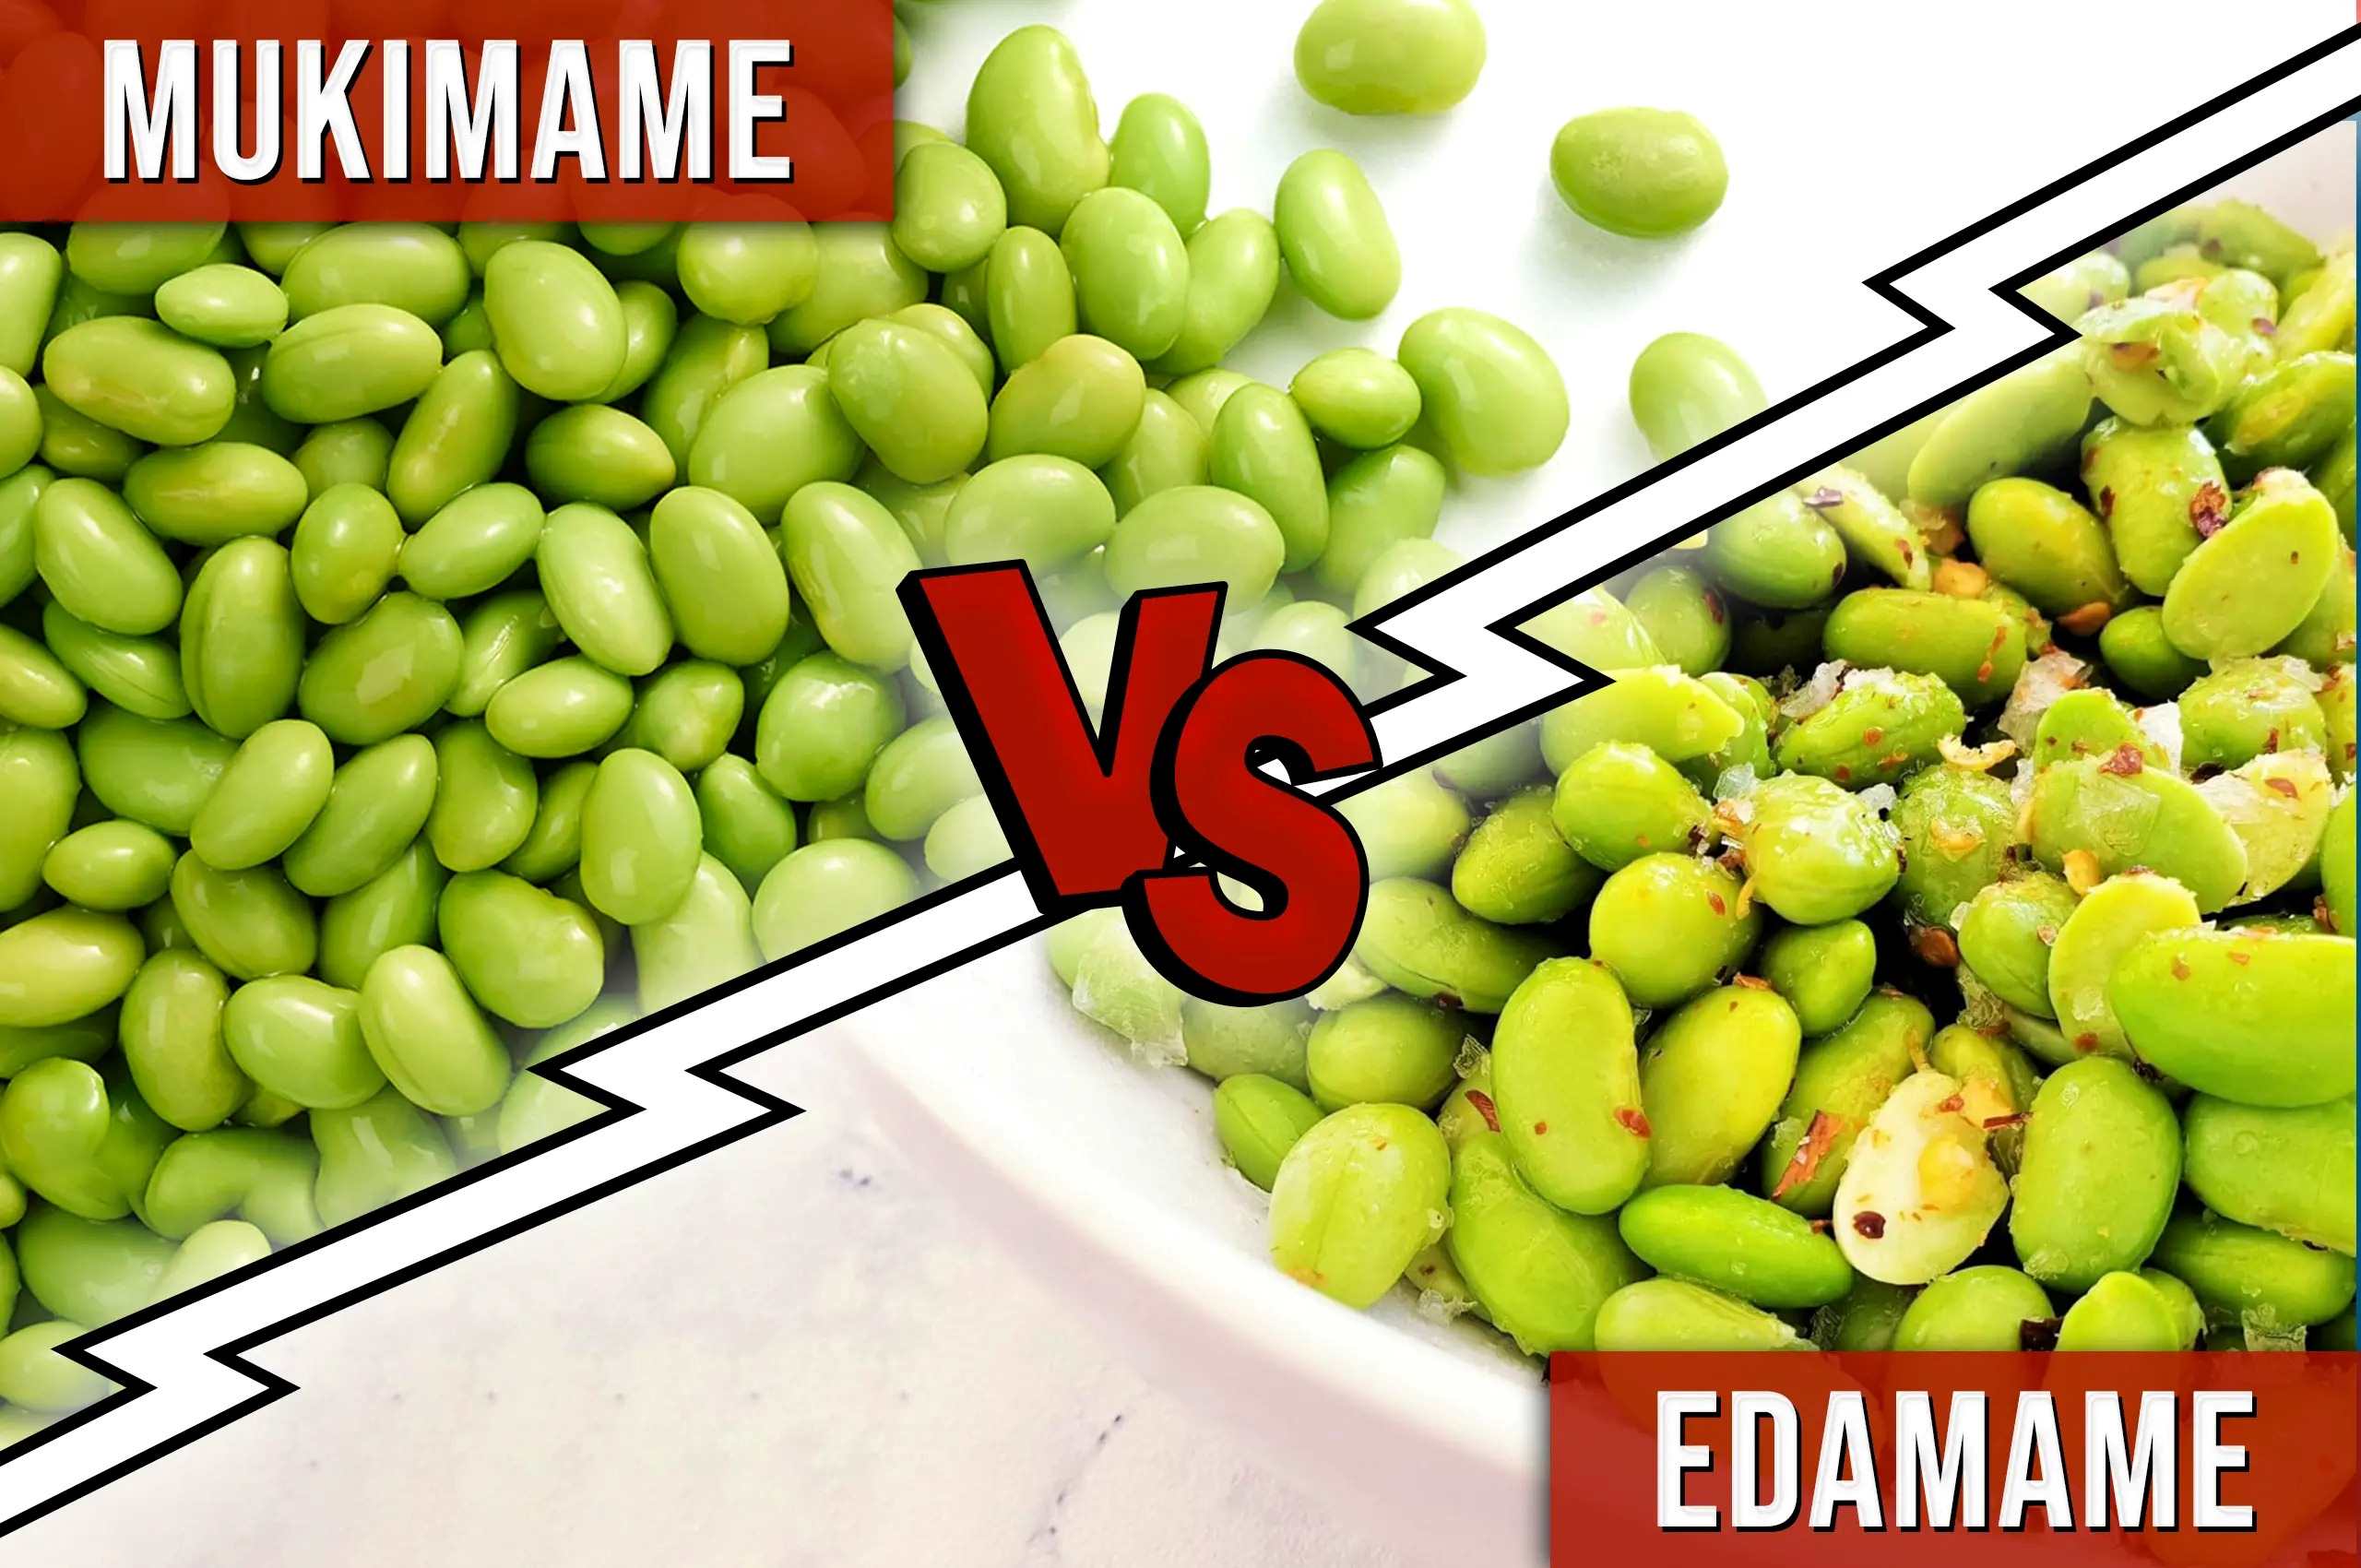 The Surprising Truth About Edamame And Mukimame – Are They Really The Same?